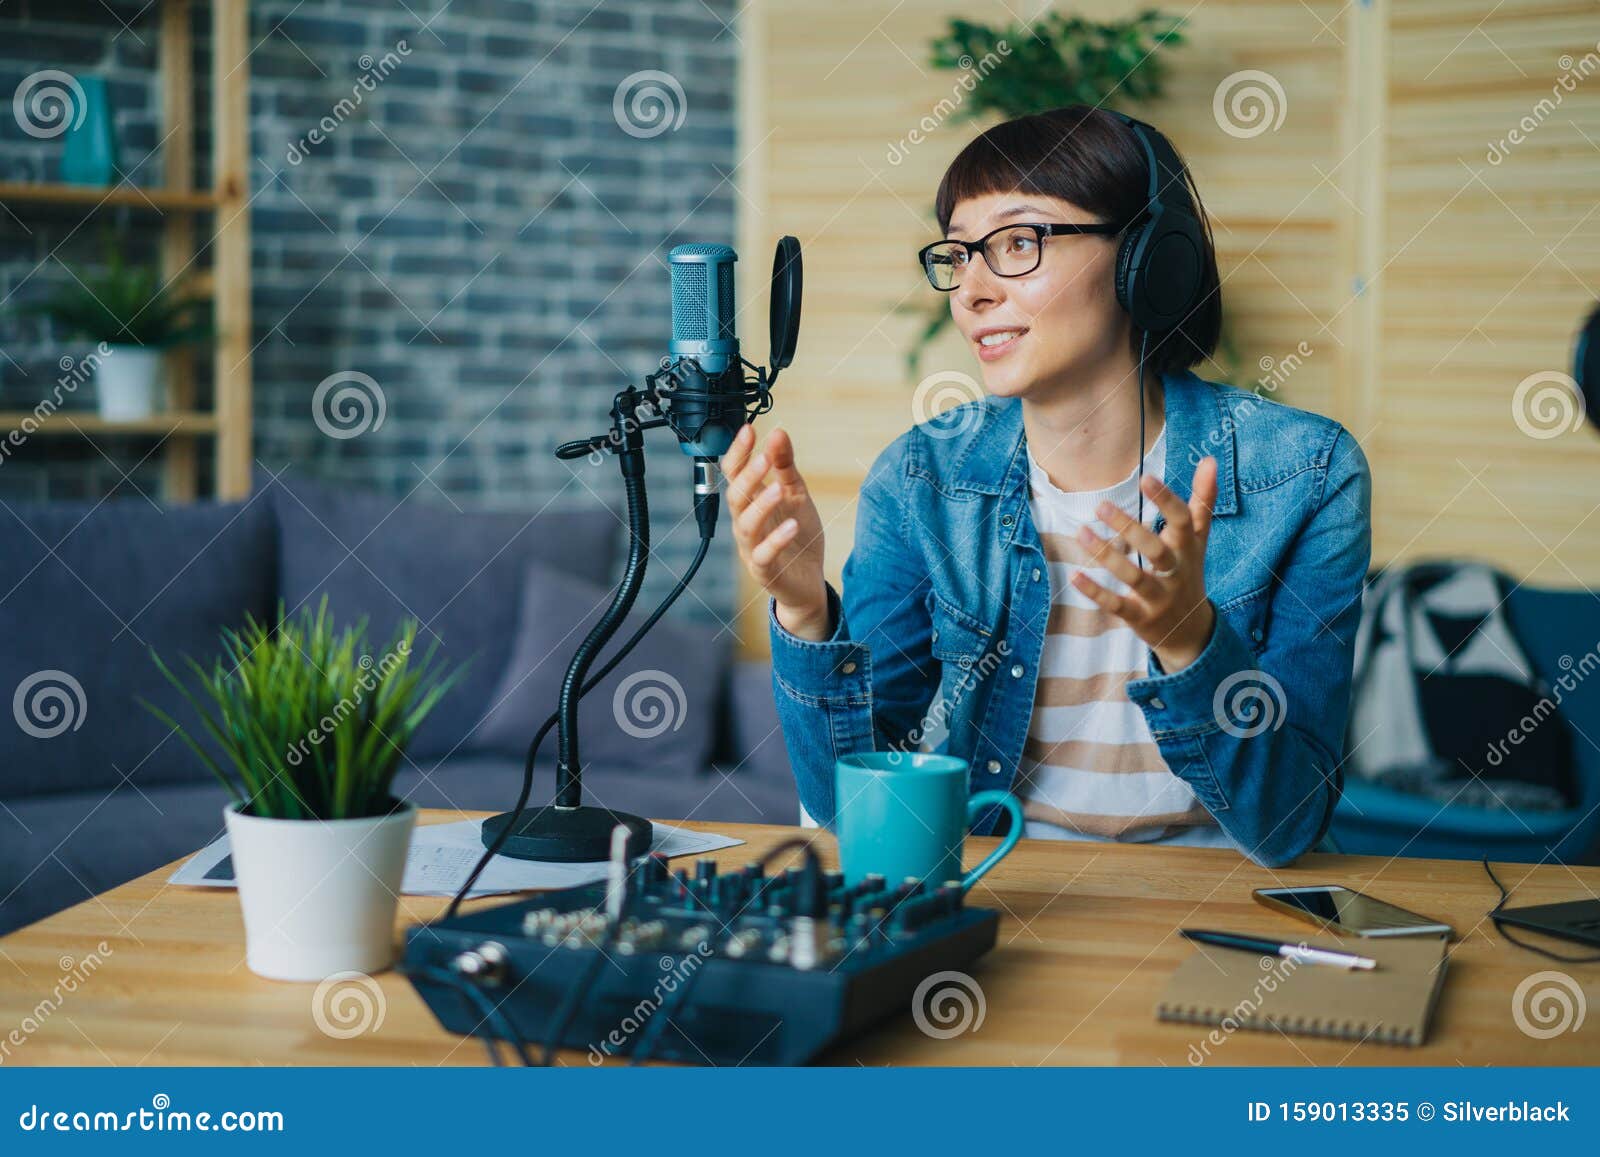 attractive young lady speaking in microphone gesturing in studio